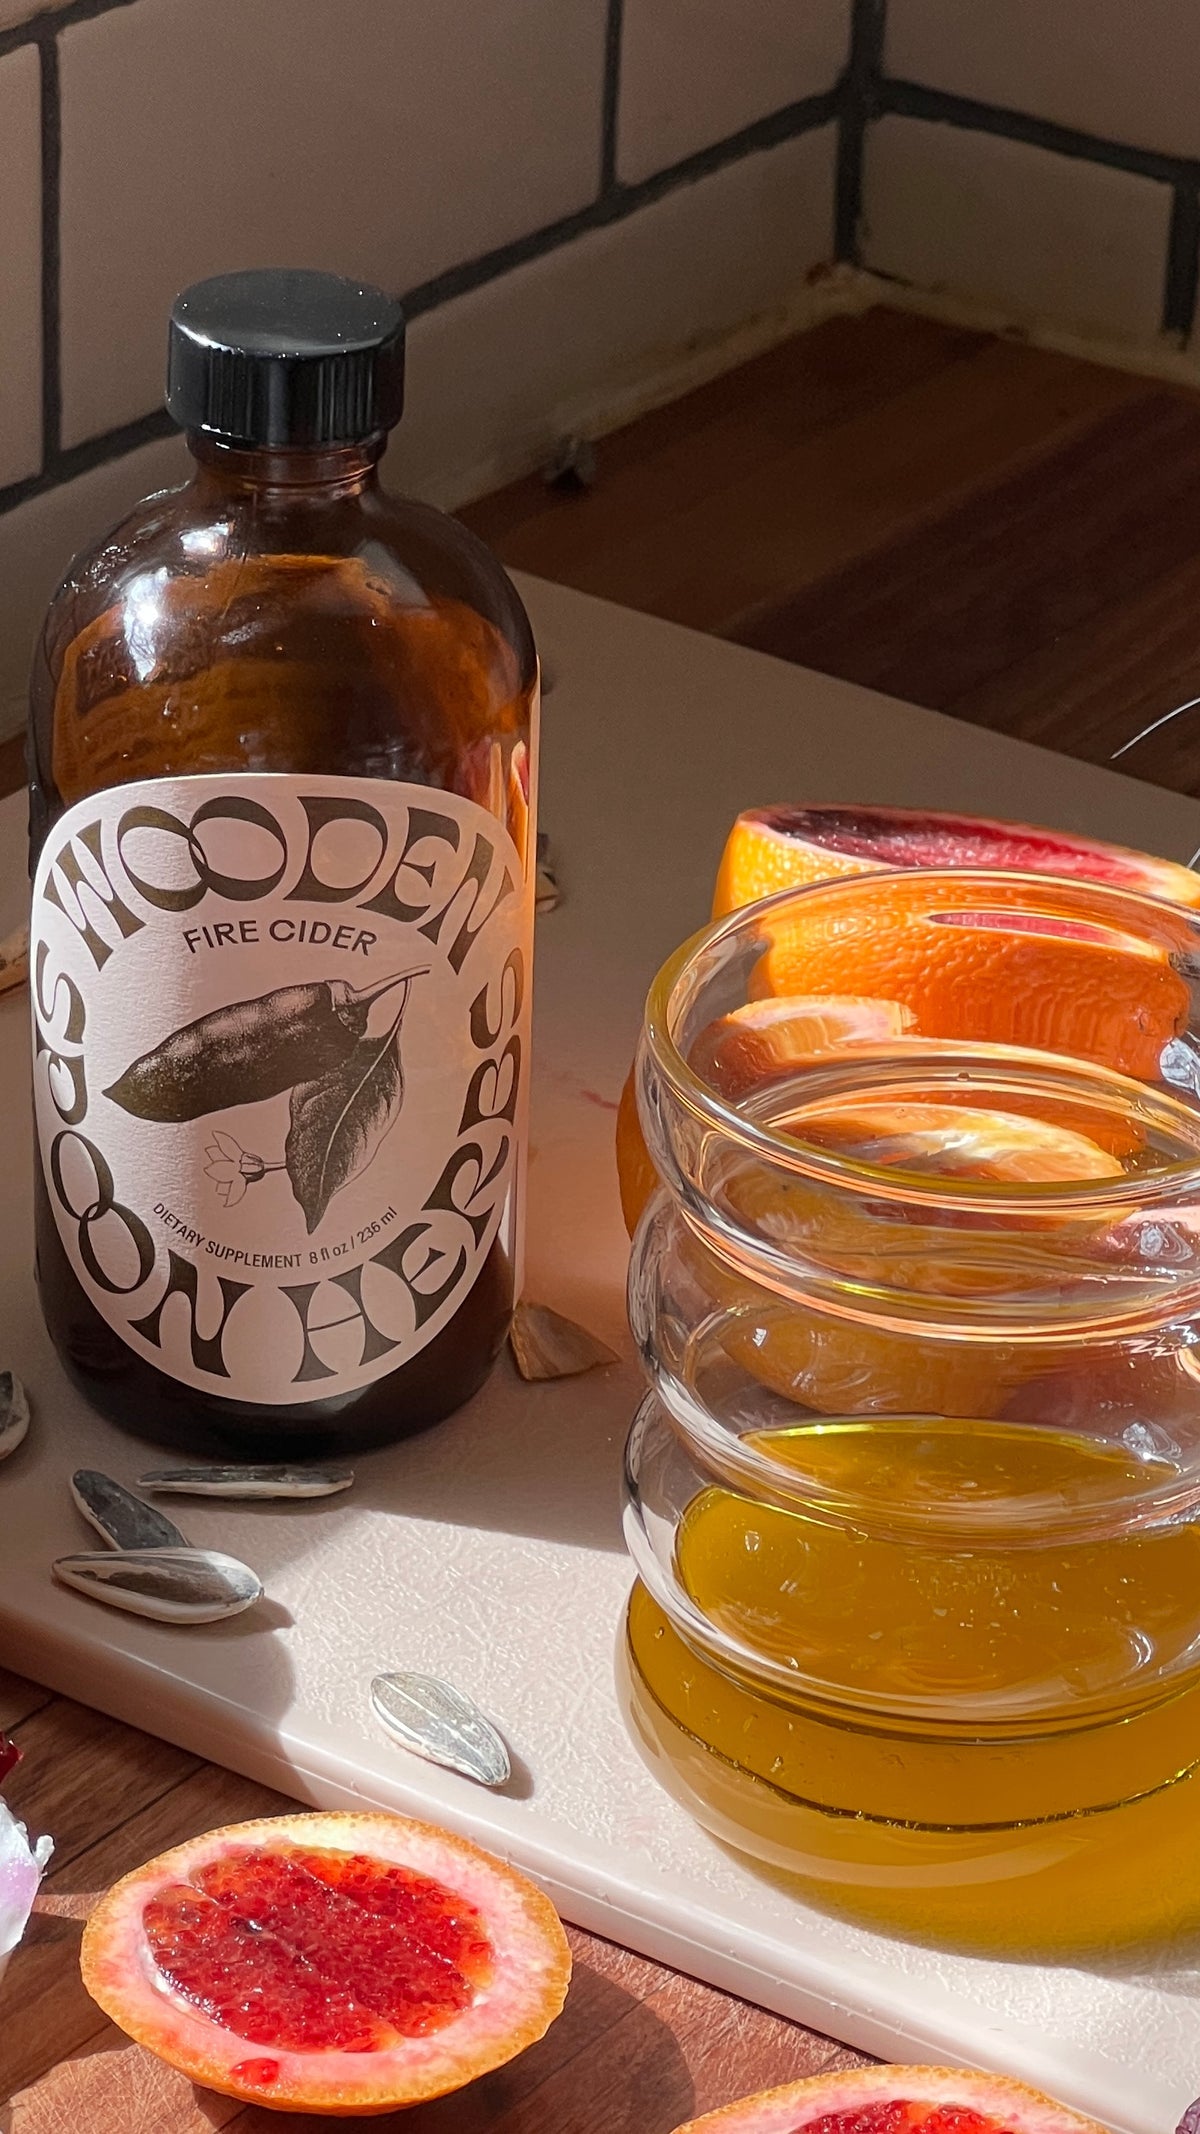 Fire Cider by Wooden Spoon Herbs